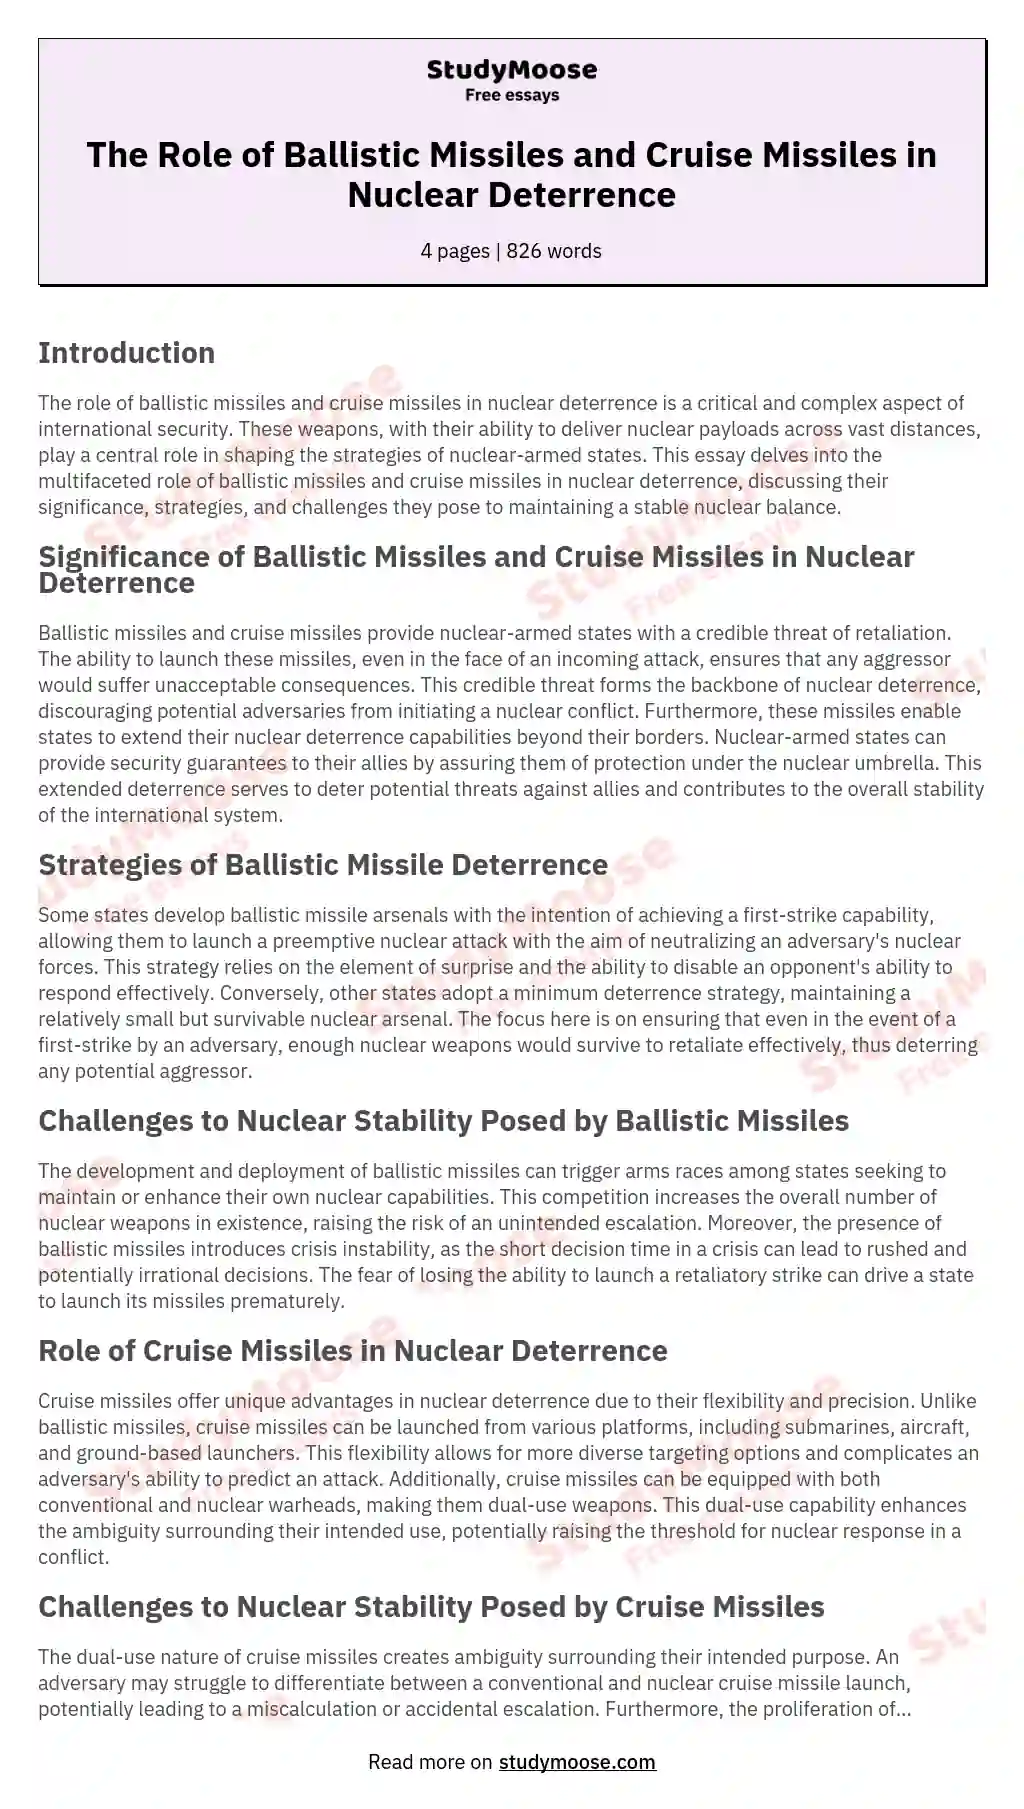 The Role of Ballistic Missiles and Cruise Missiles in Nuclear Deterrence essay